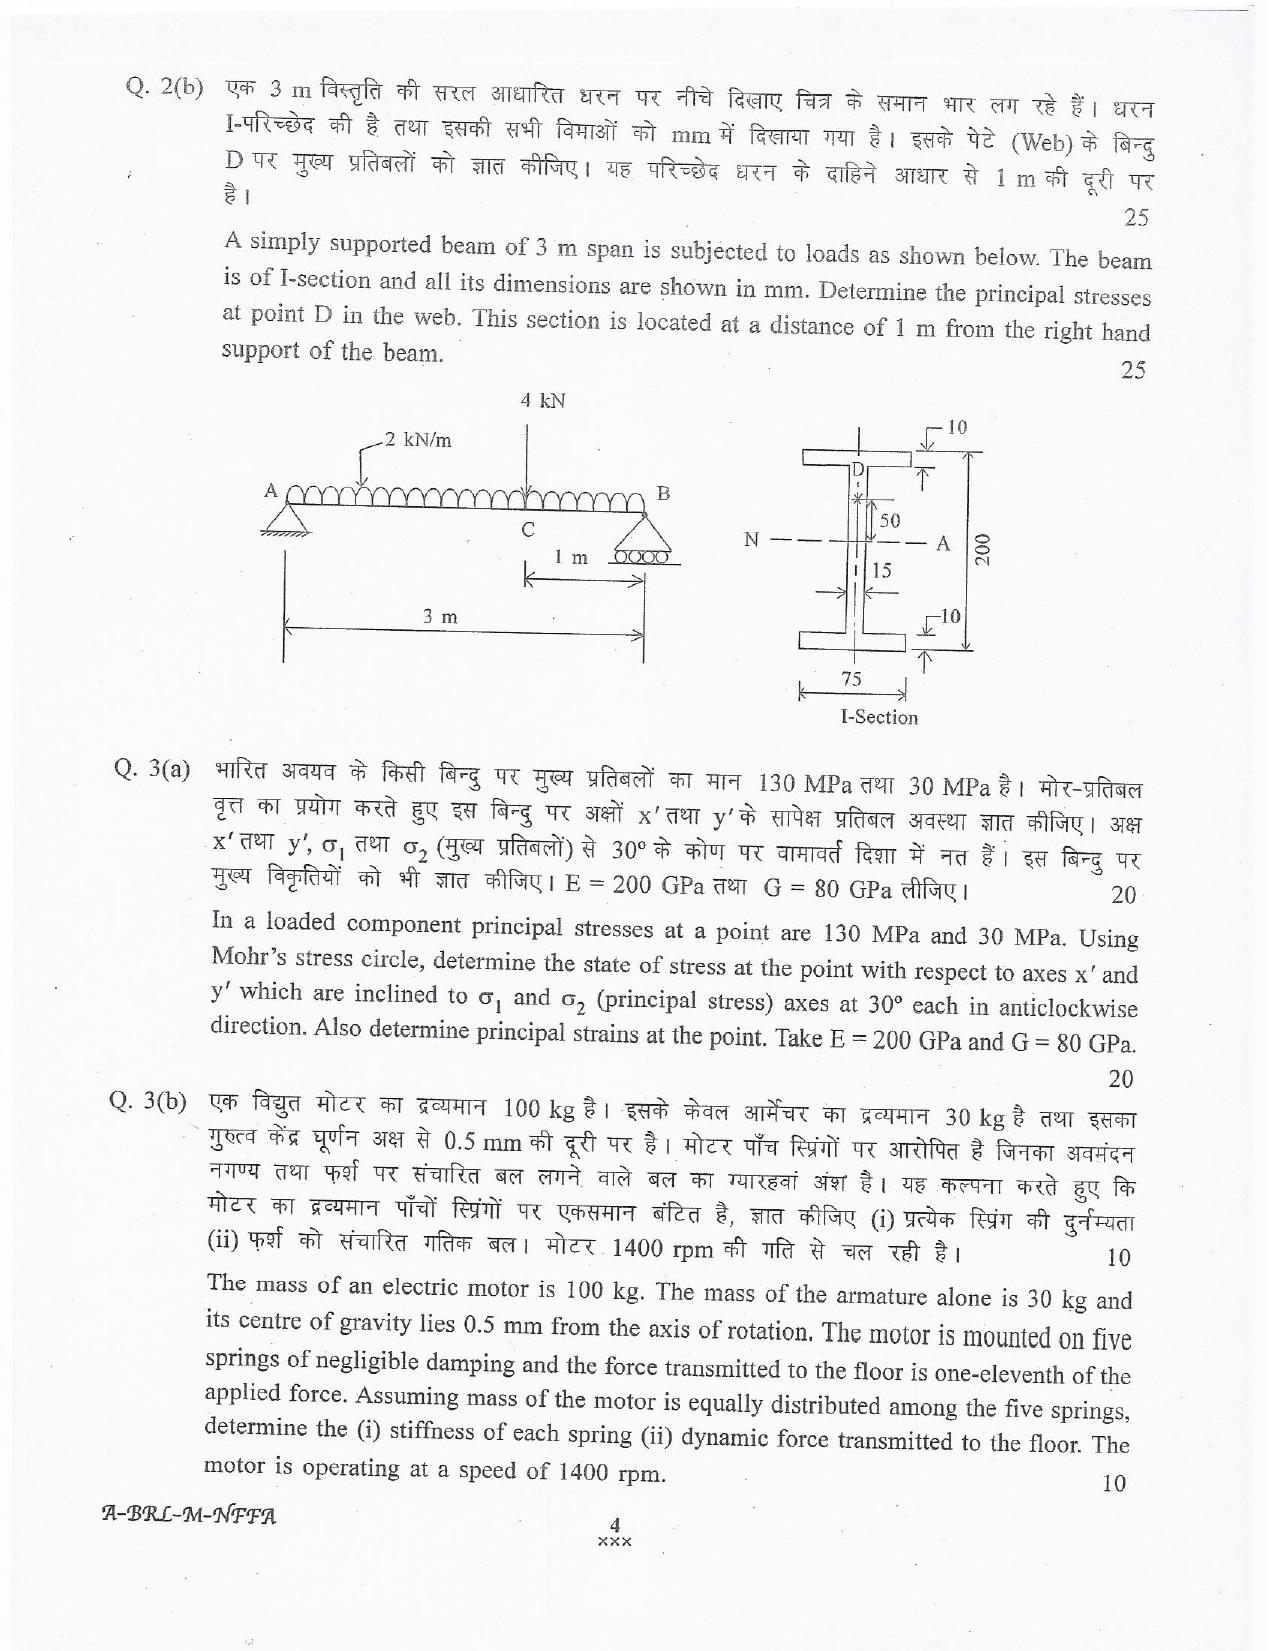 lakshadweep.gov.in Mechanical Engineering Question Papers - Page 4